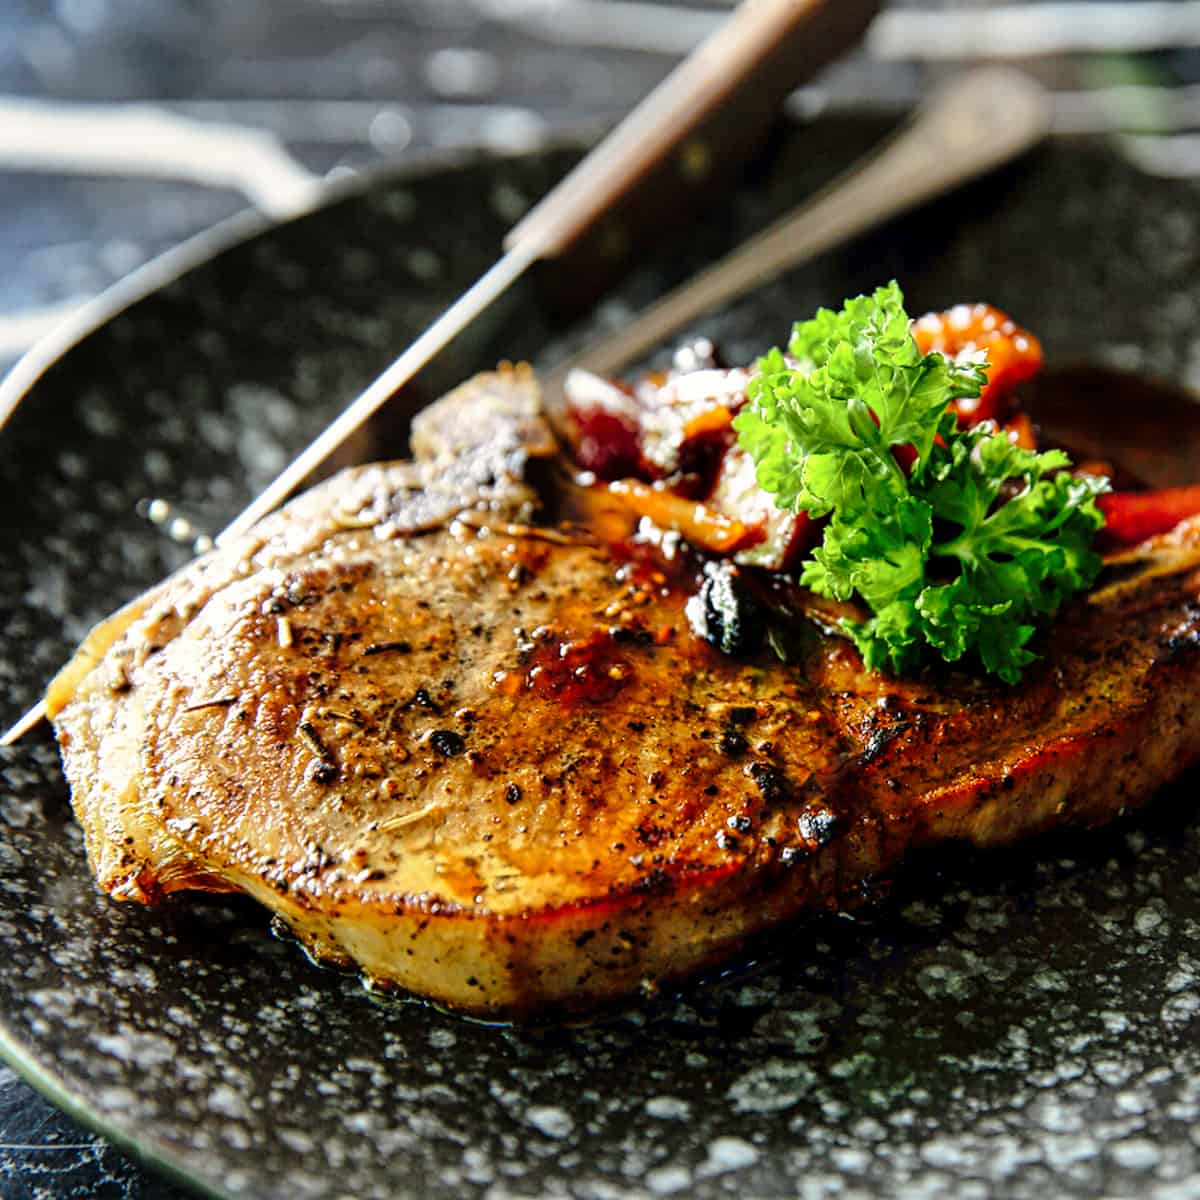 PANISH- STYLE GRILLED PORK CHOPS